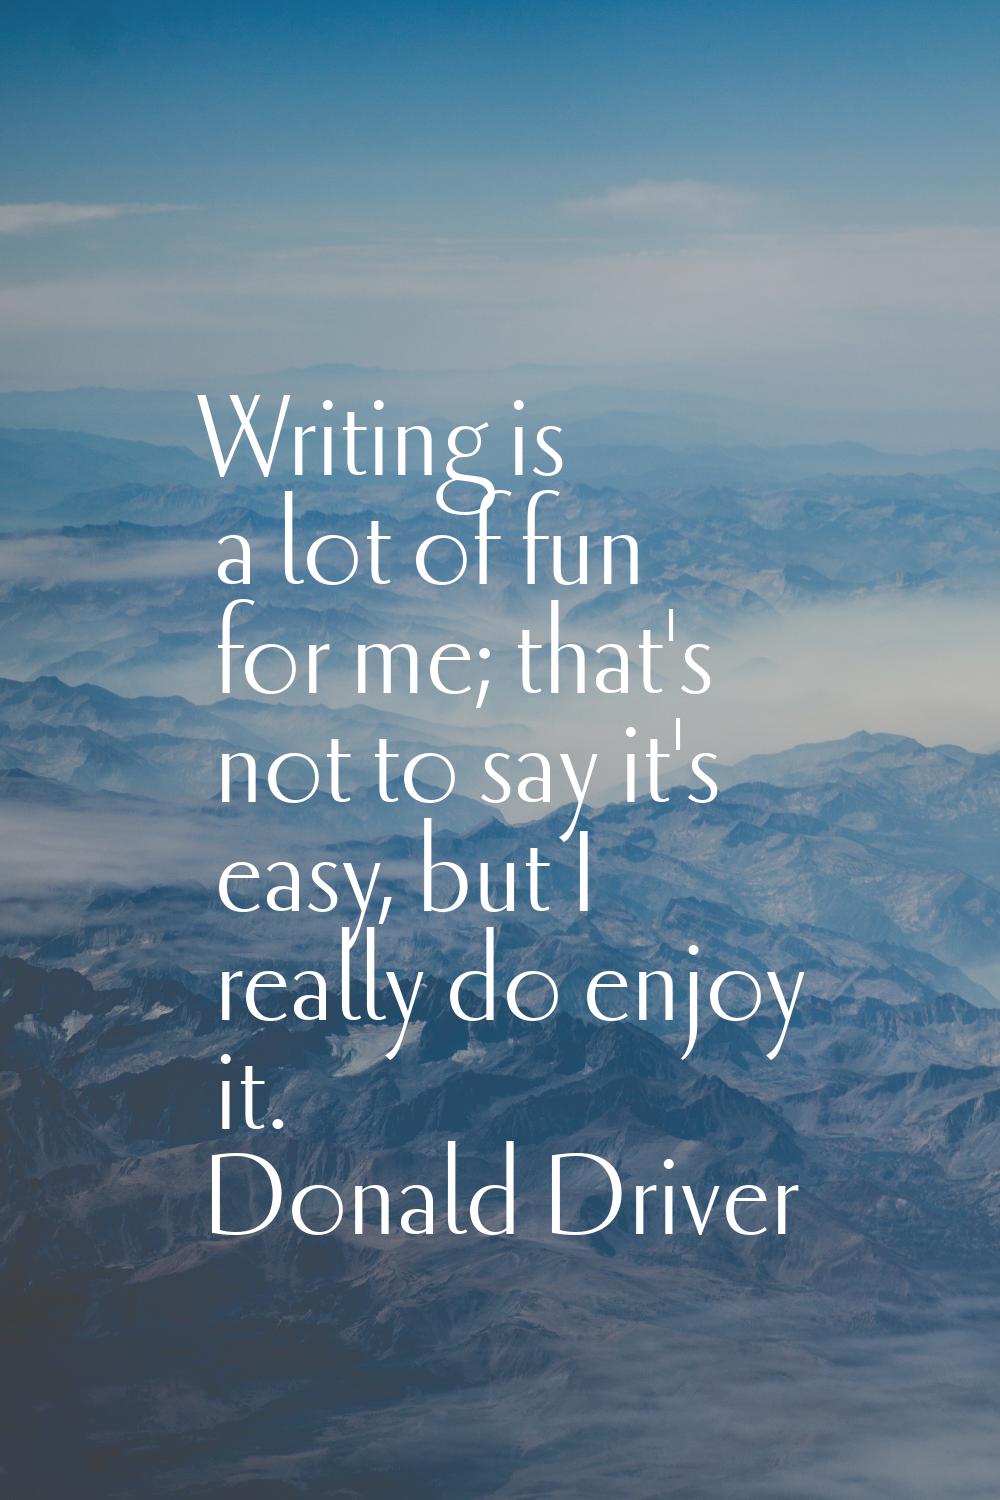 Writing is a lot of fun for me; that's not to say it's easy, but I really do enjoy it.